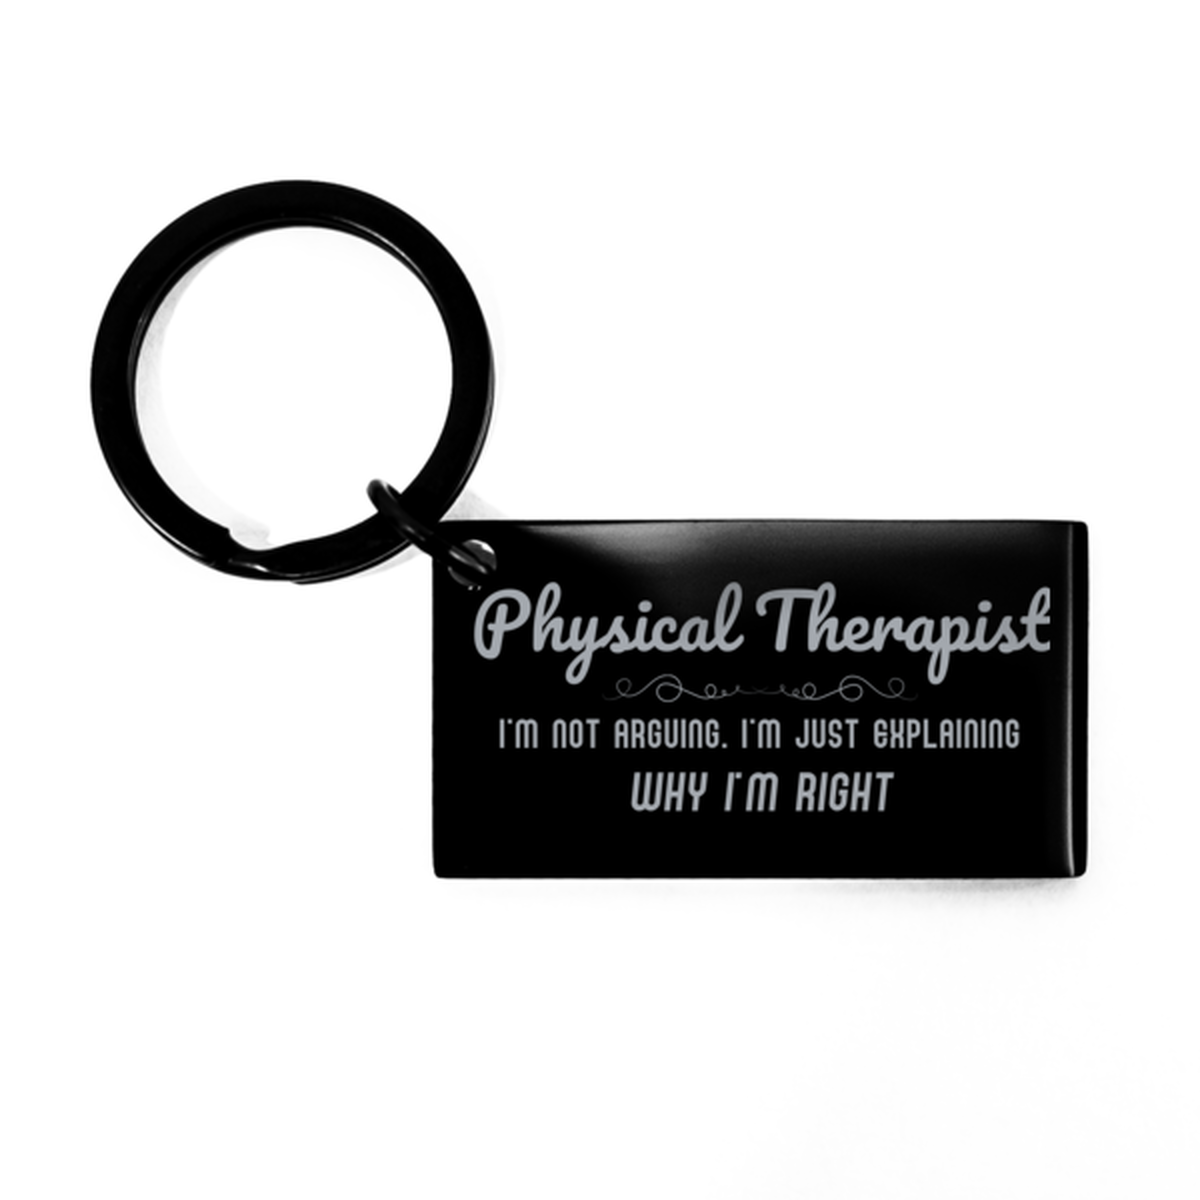 Physical Therapist I'm not Arguing. I'm Just Explaining Why I'm RIGHT Keychain, Funny Saying Quote Physical Therapist Gifts For Physical Therapist Graduation Birthday Christmas Gifts for Men Women Coworker